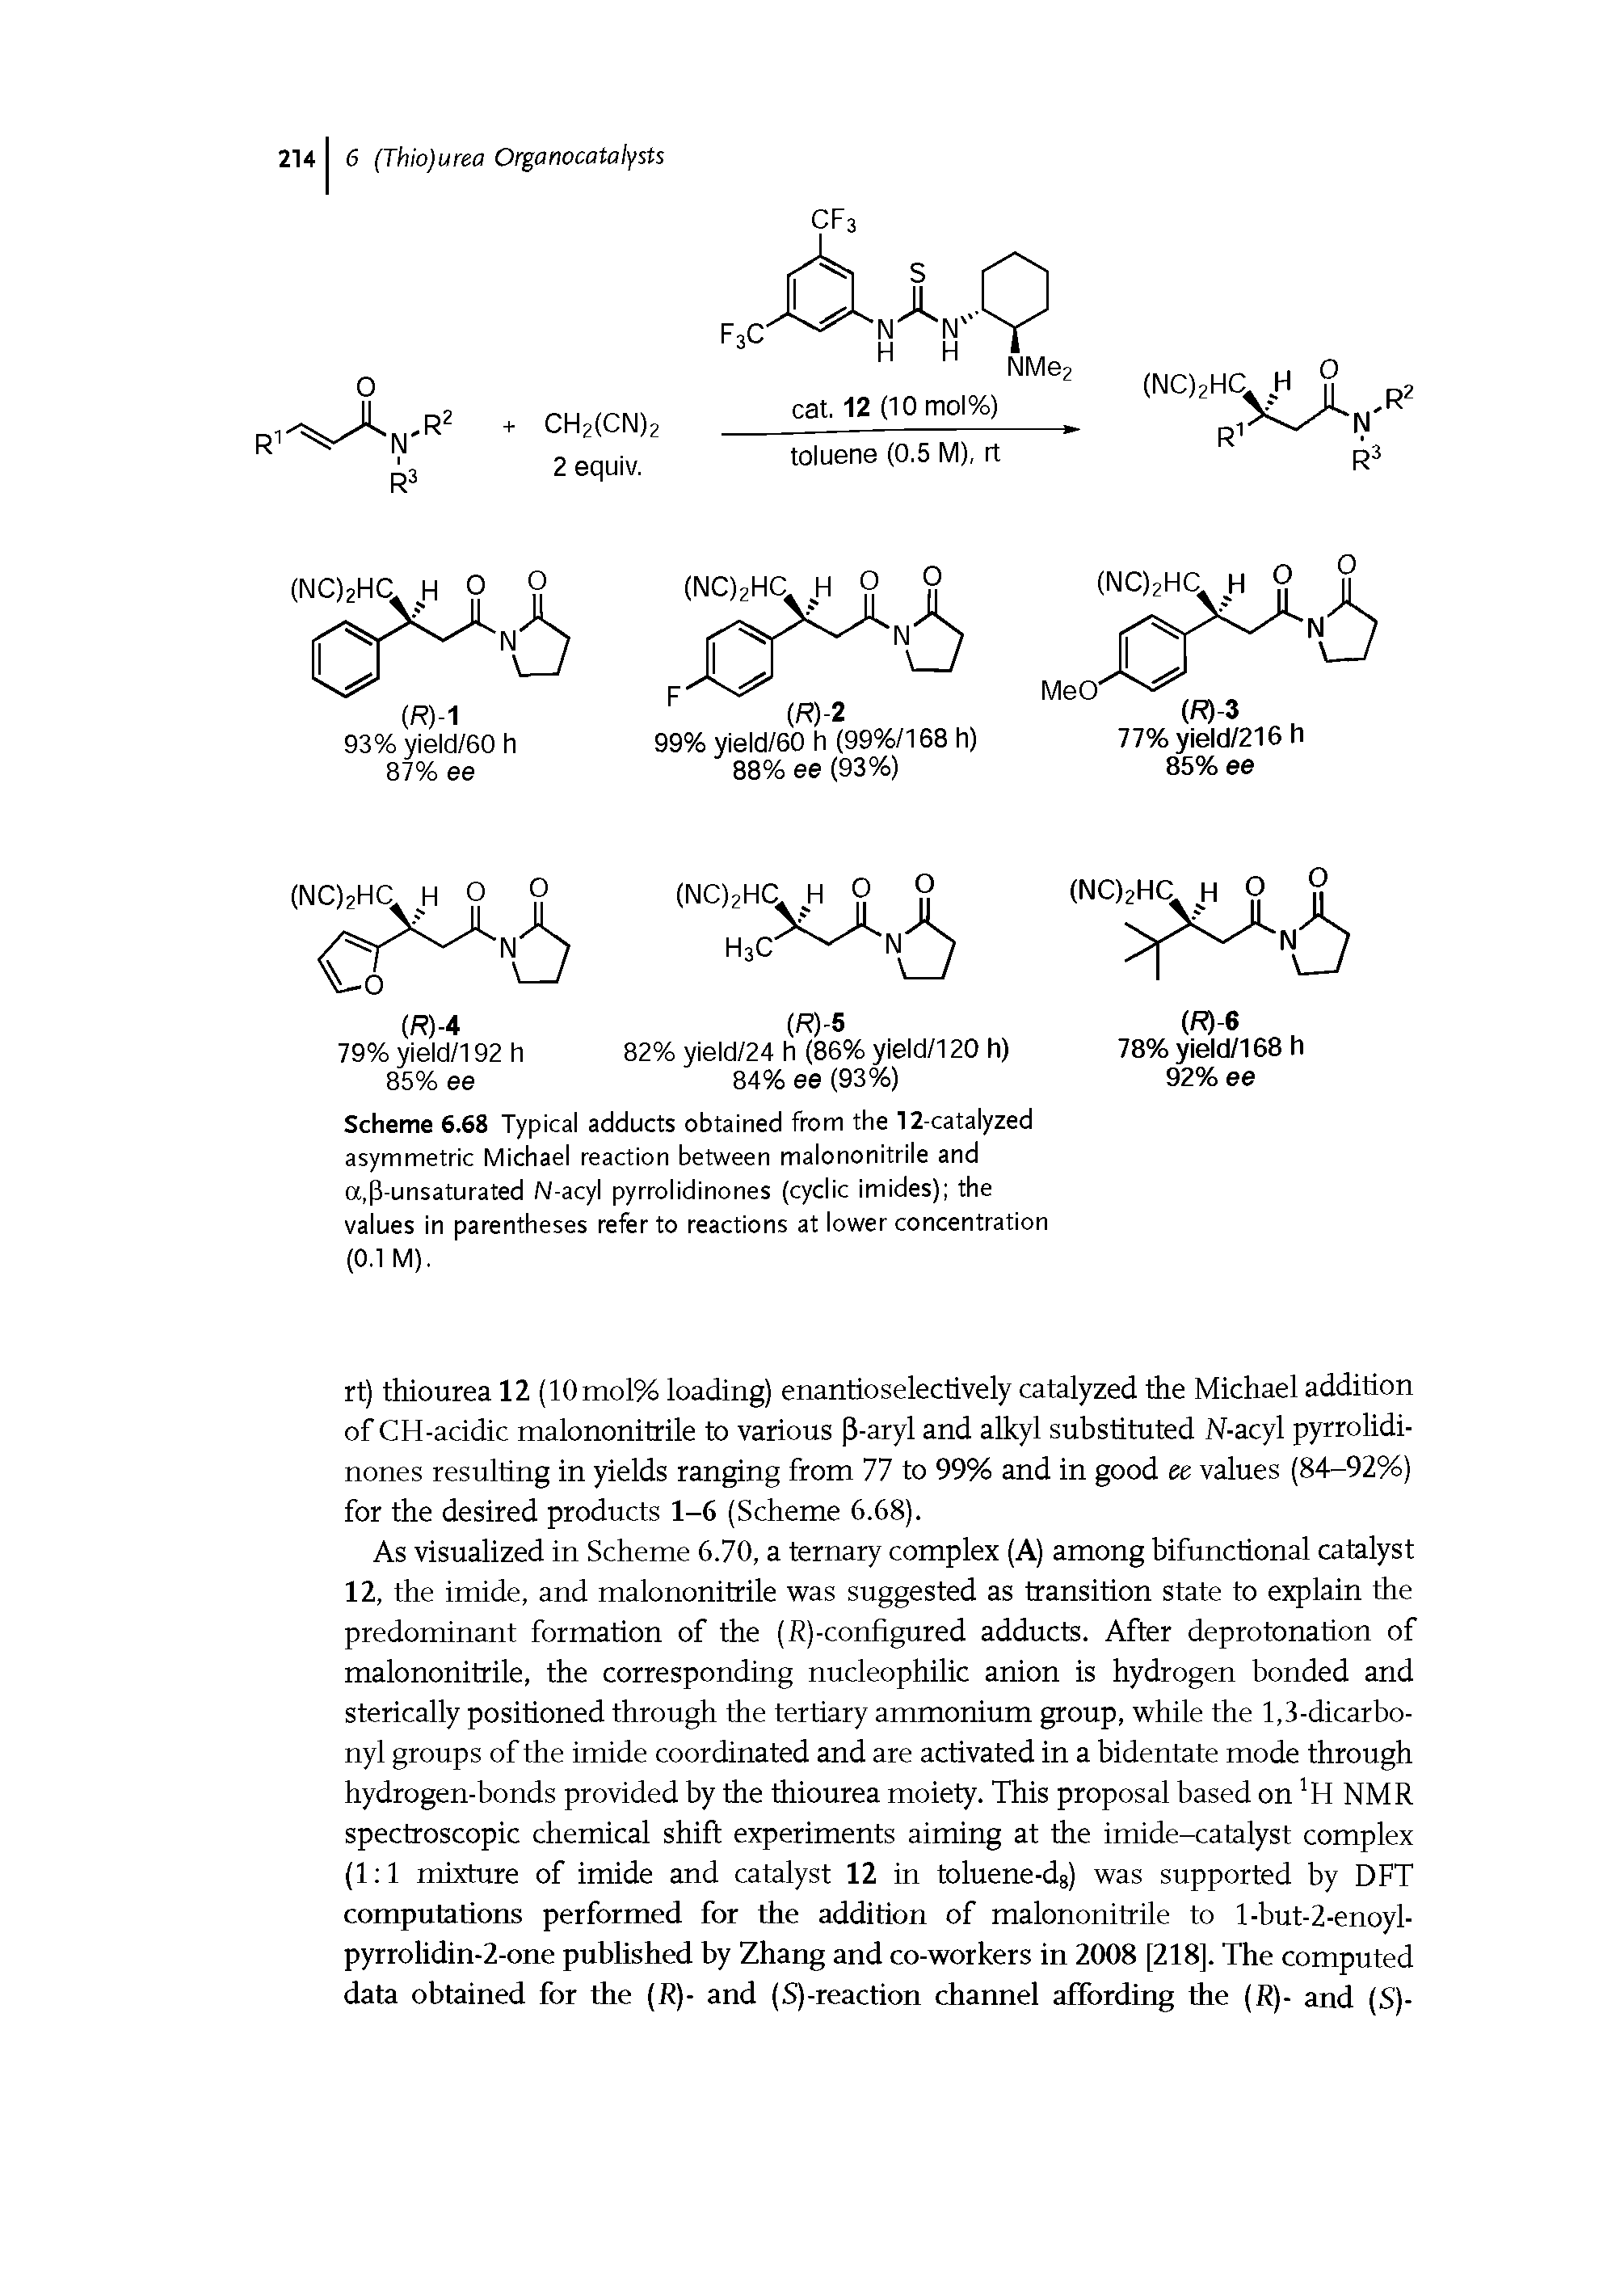 Scheme 6.68 Typical adducts obtained from the 12-catalyzed asymmetric Michael reaction between malononitrile and a.P-unsaturated N-acyl pyrrolidinones (cyclic imides) the values in parentheses refer to reactions at lower concentration (0.1 M).